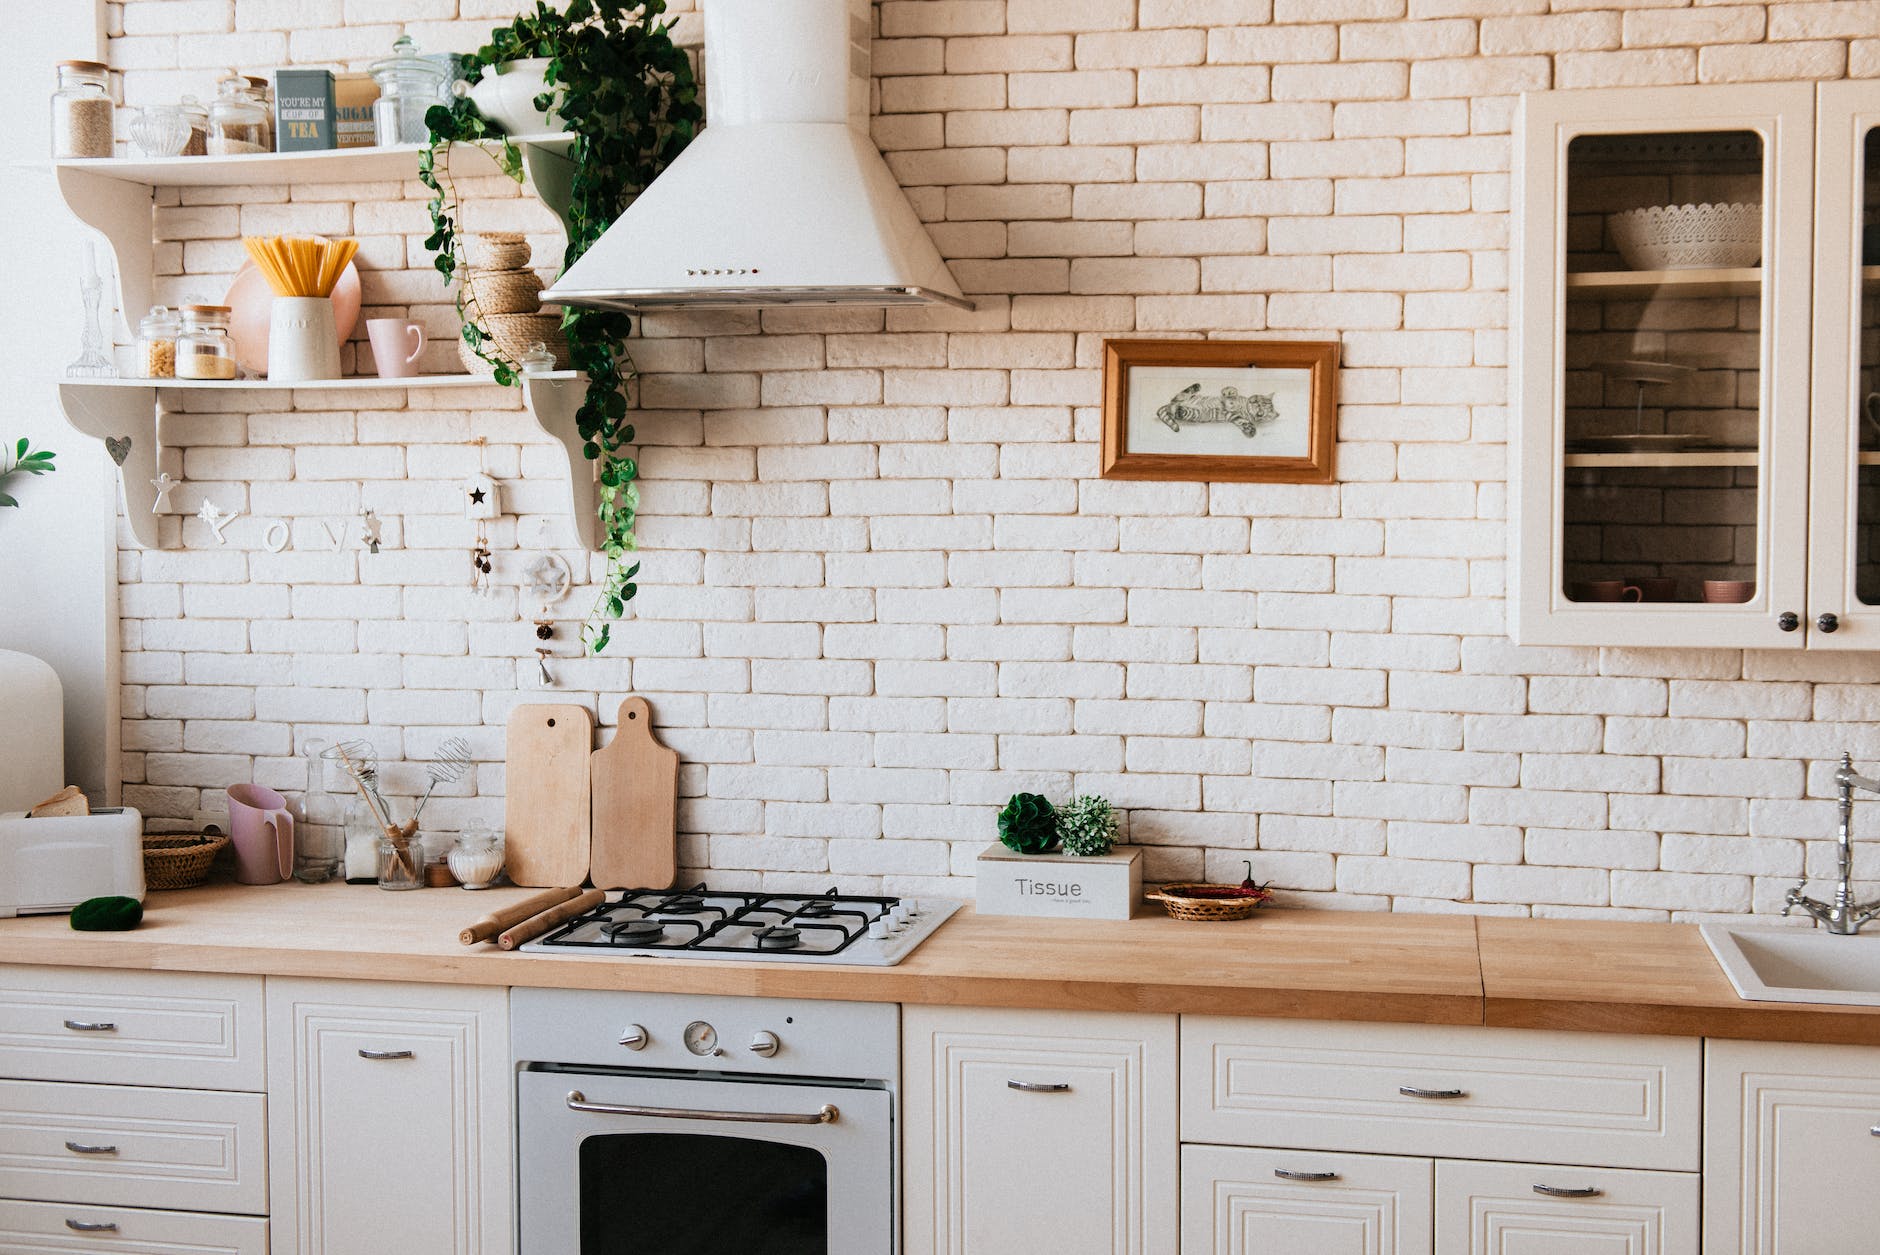 Does a Stunning Kitchen Inspire You to Cook More?